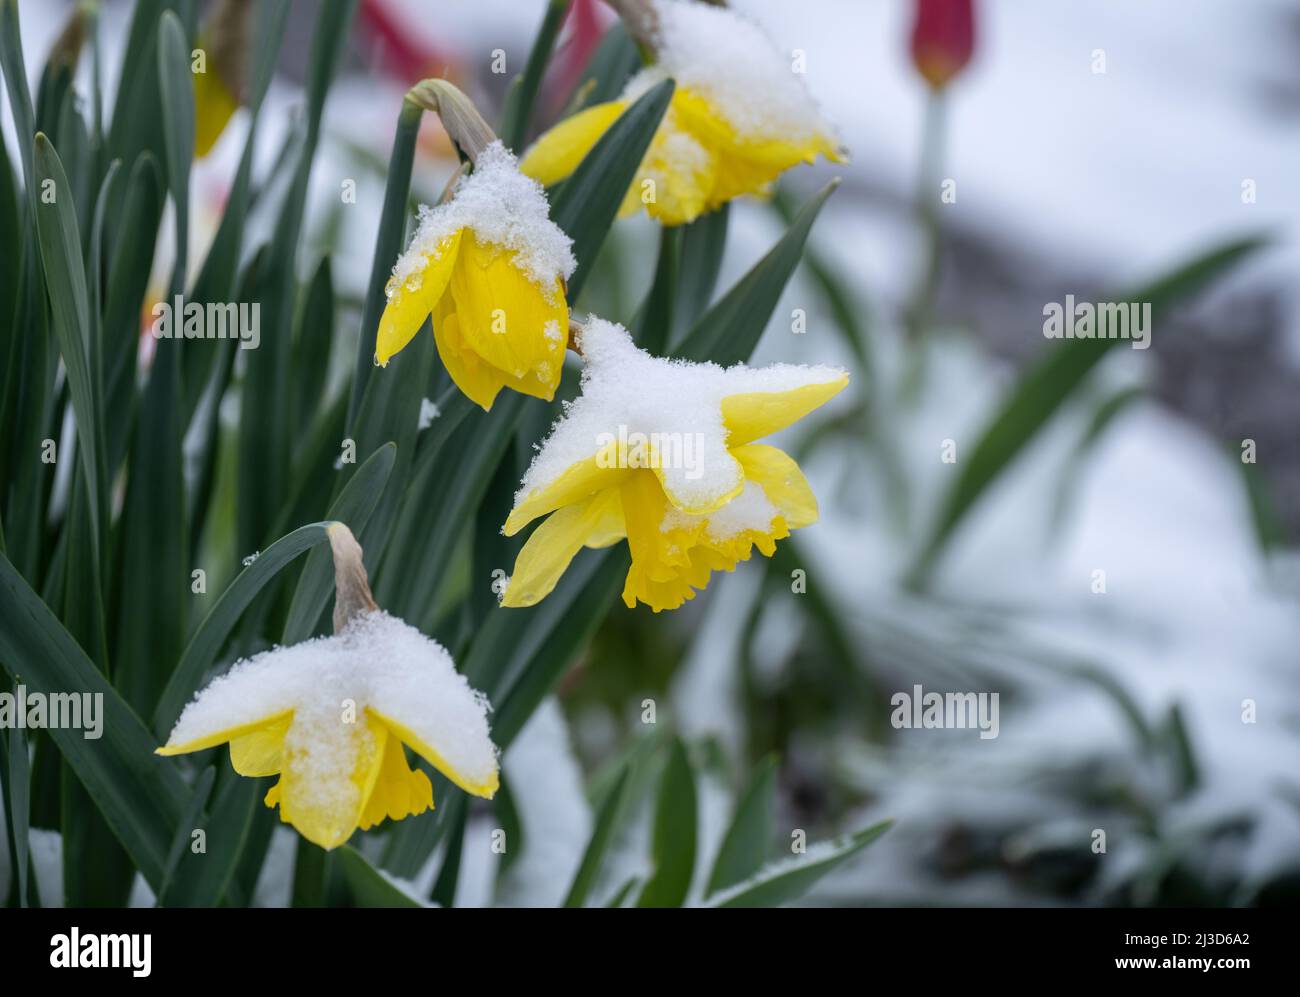 Snowy, yellow flowers of daffodils Stock Photo